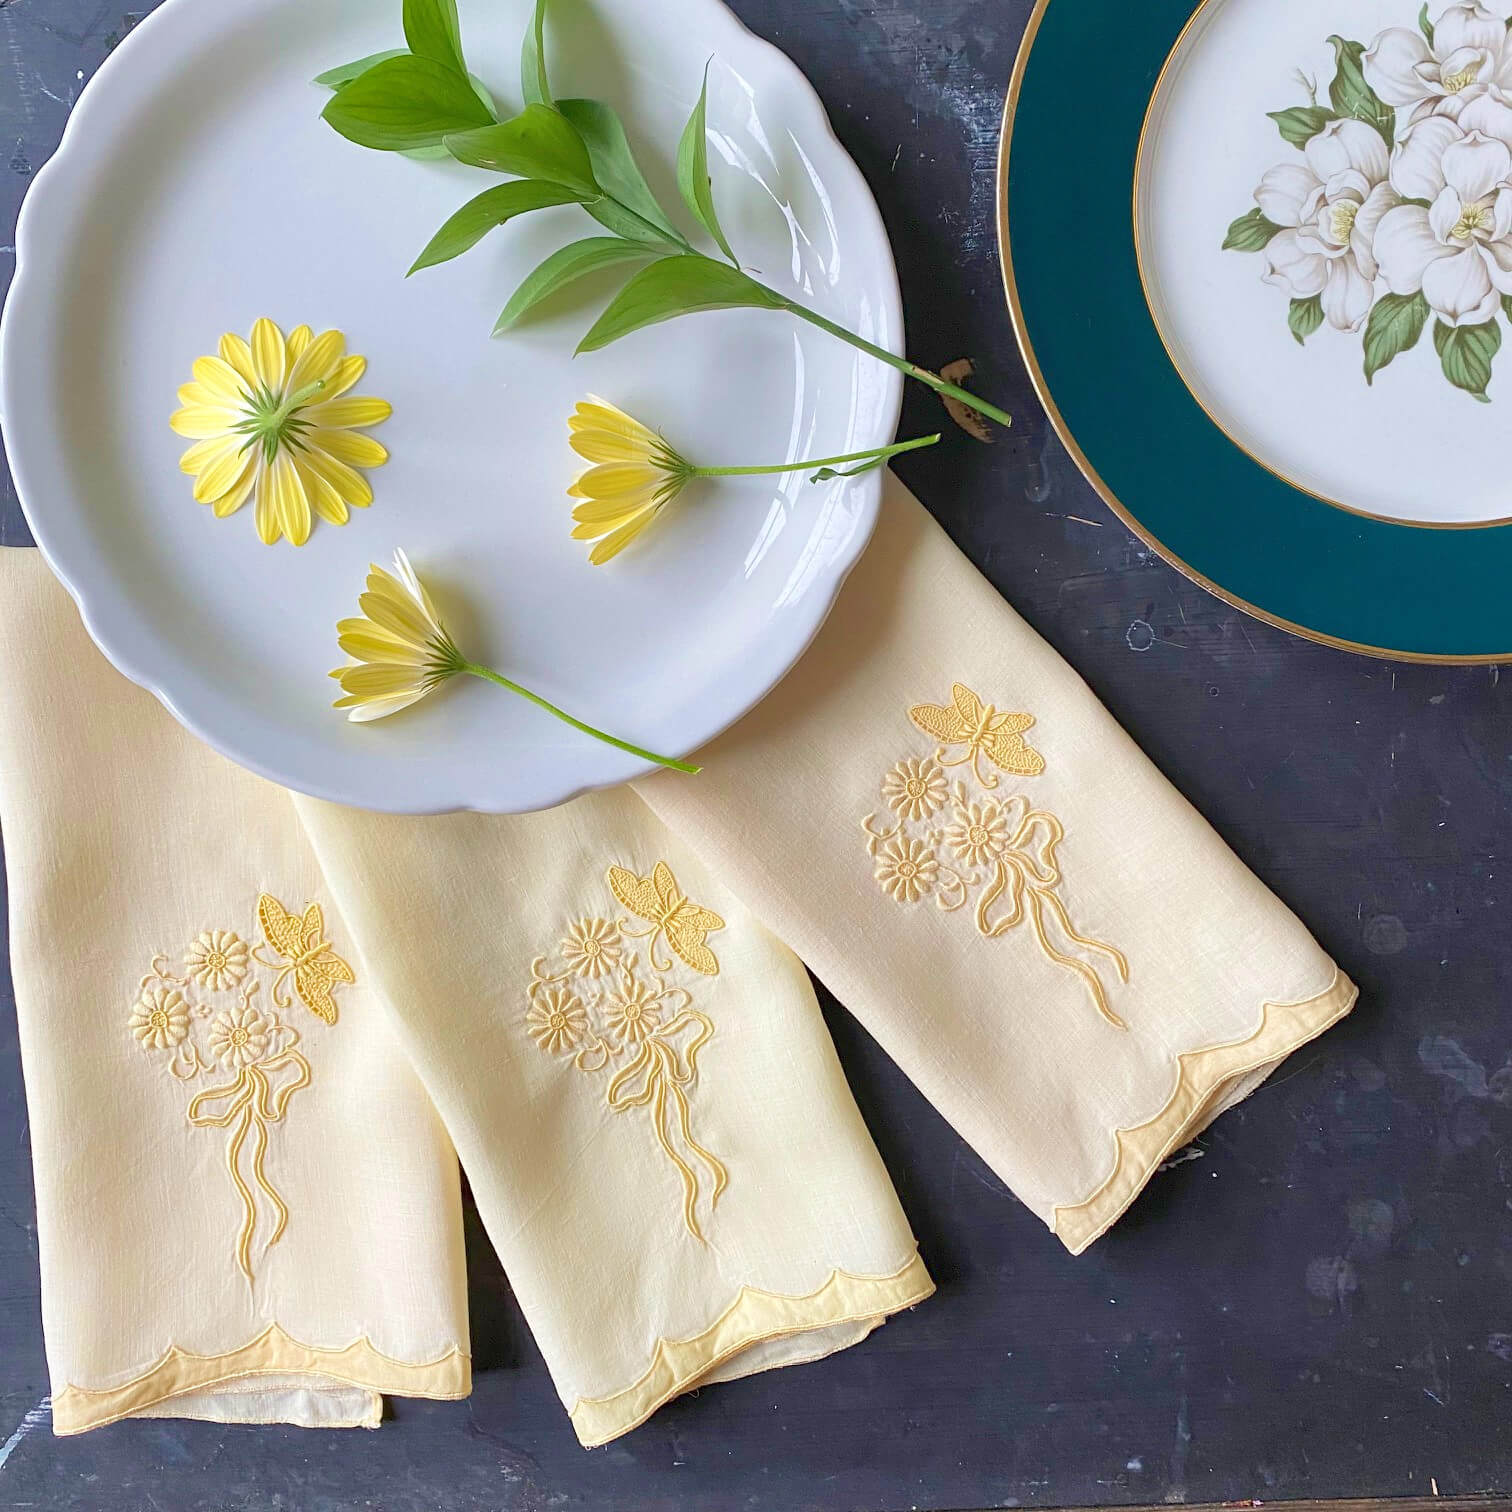 Vintage 1950s Marghab Yellow Butterfly Linens - Guest Towel Size - Embroidered Flowers & Butterfly - Set of Three